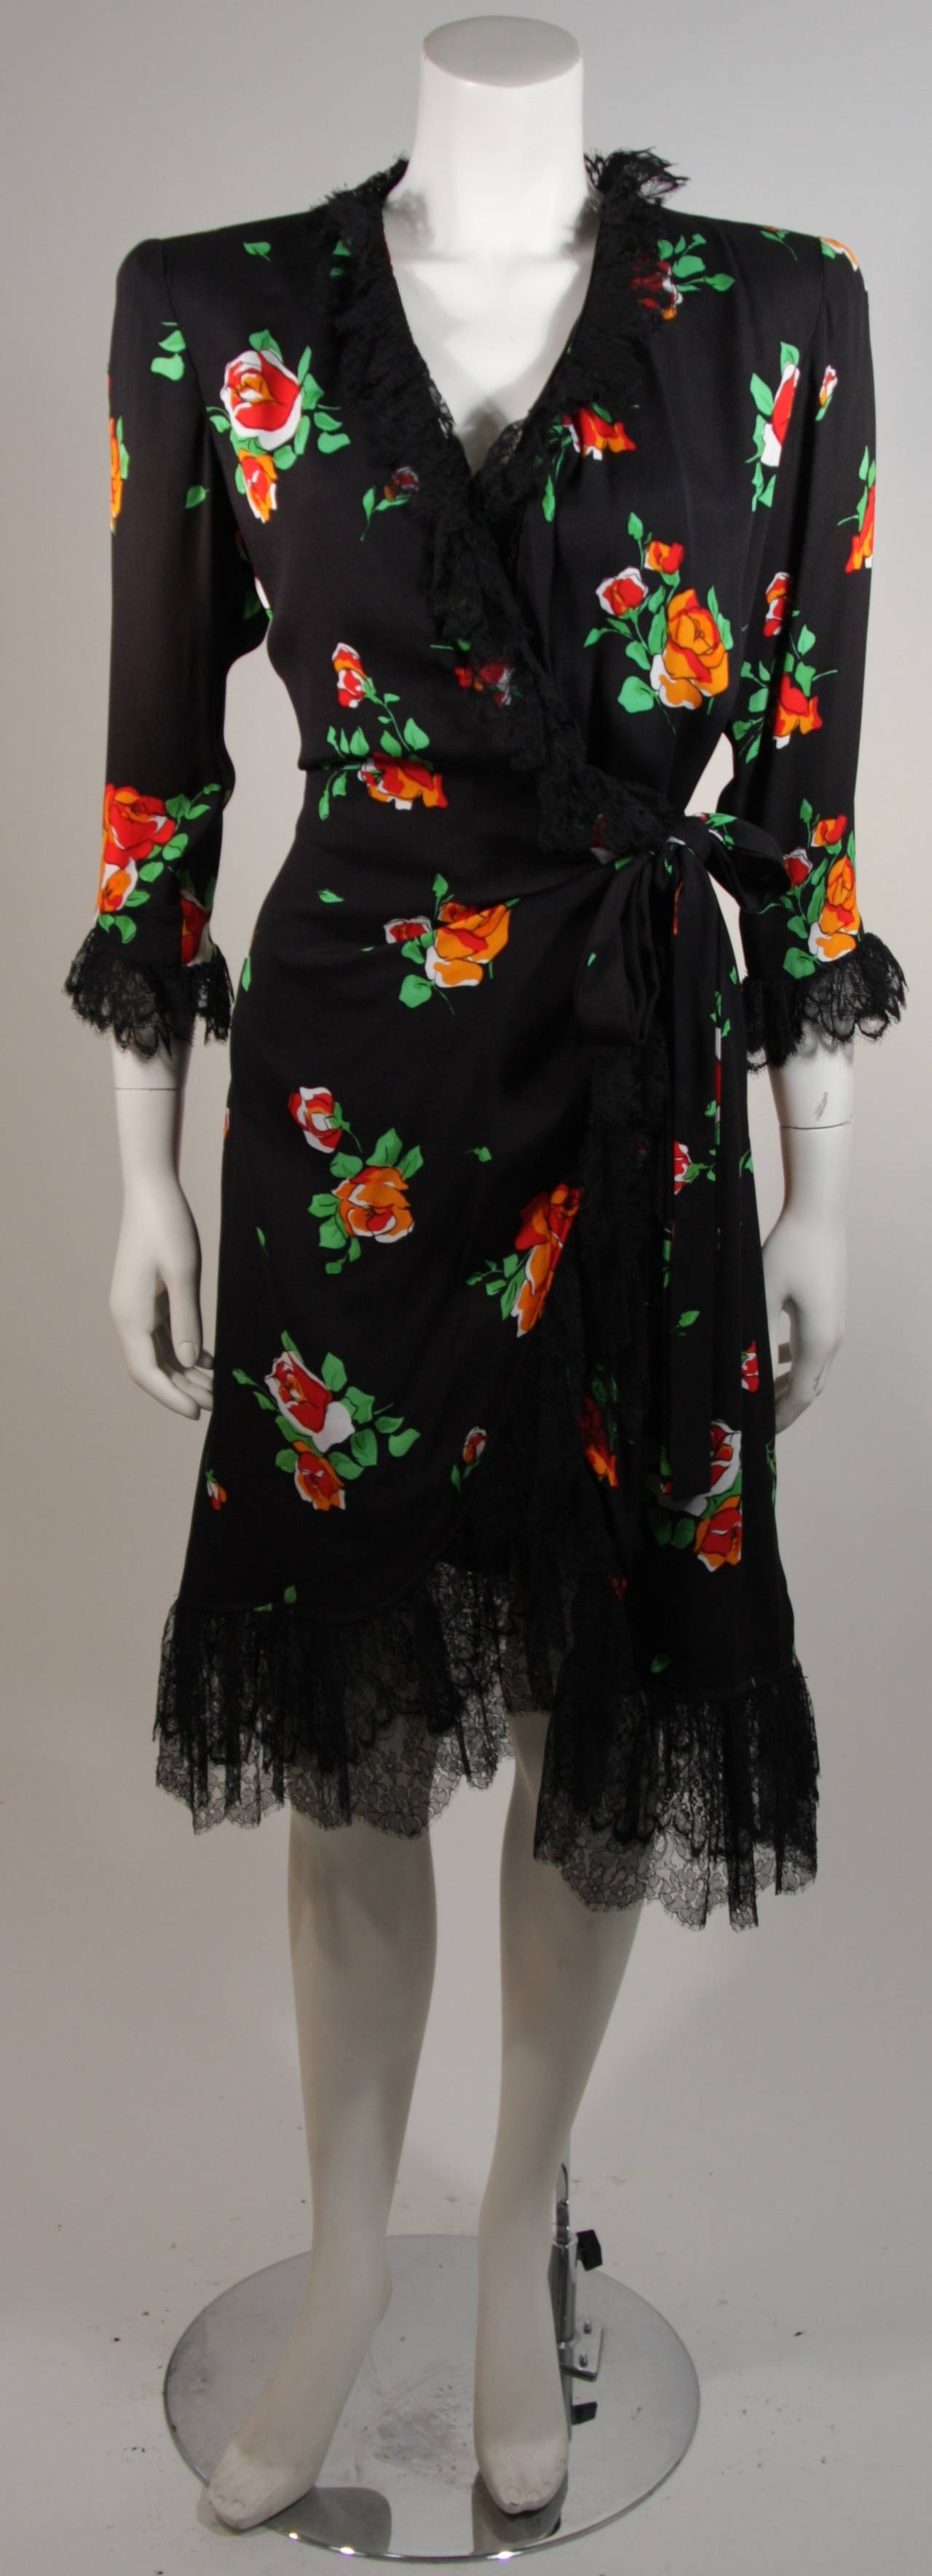 This Yves Saint Laurent dress is available for viewing at our Beverly Hills Boutique. We offer a large selection of evening gowns and luxury garments.
This vintage wrap dress is composed of black crepe with a deep orange rose print, lined in black